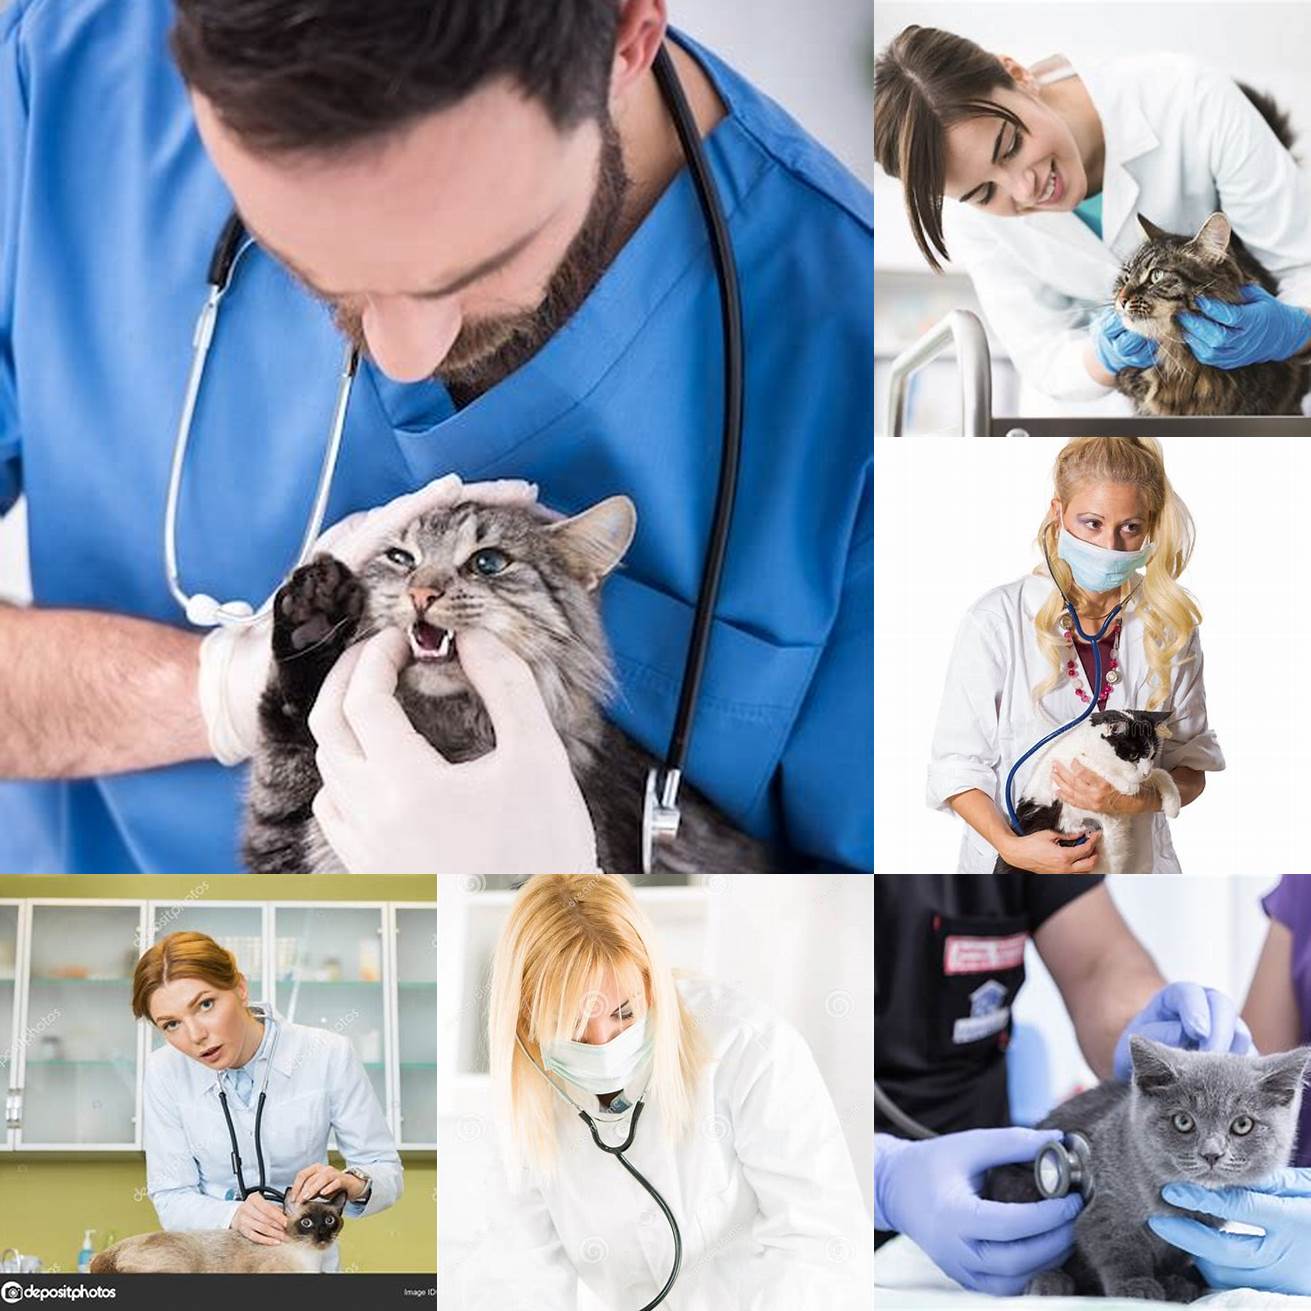 A picture of a veterinarian examining a cat